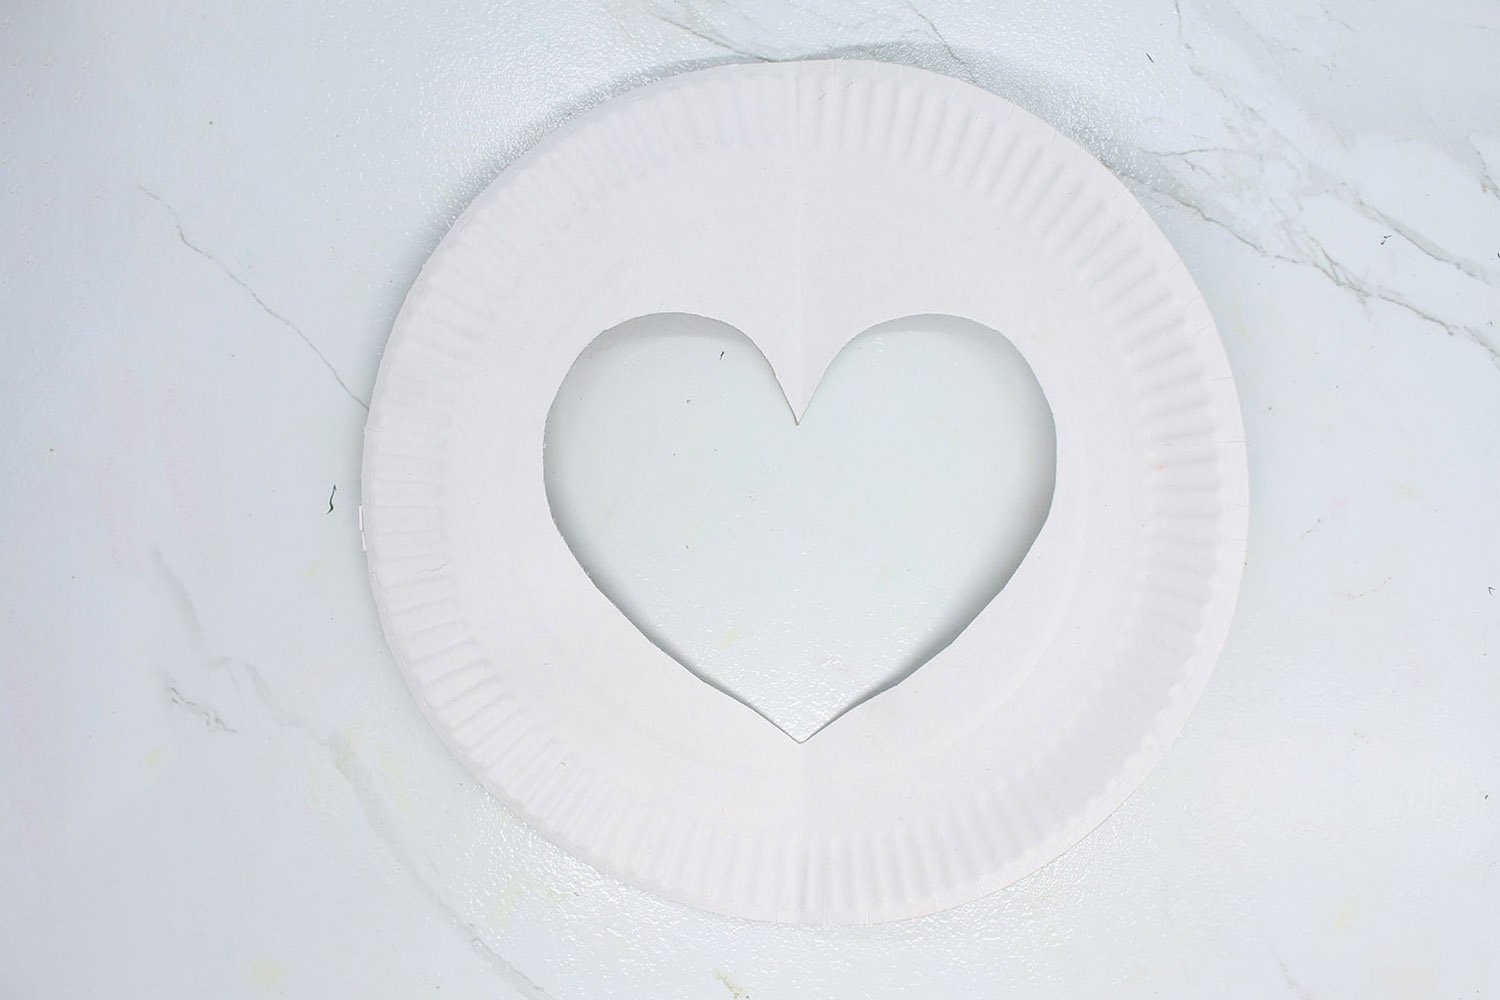 How To Make a Paper Plate Heart - Step 05